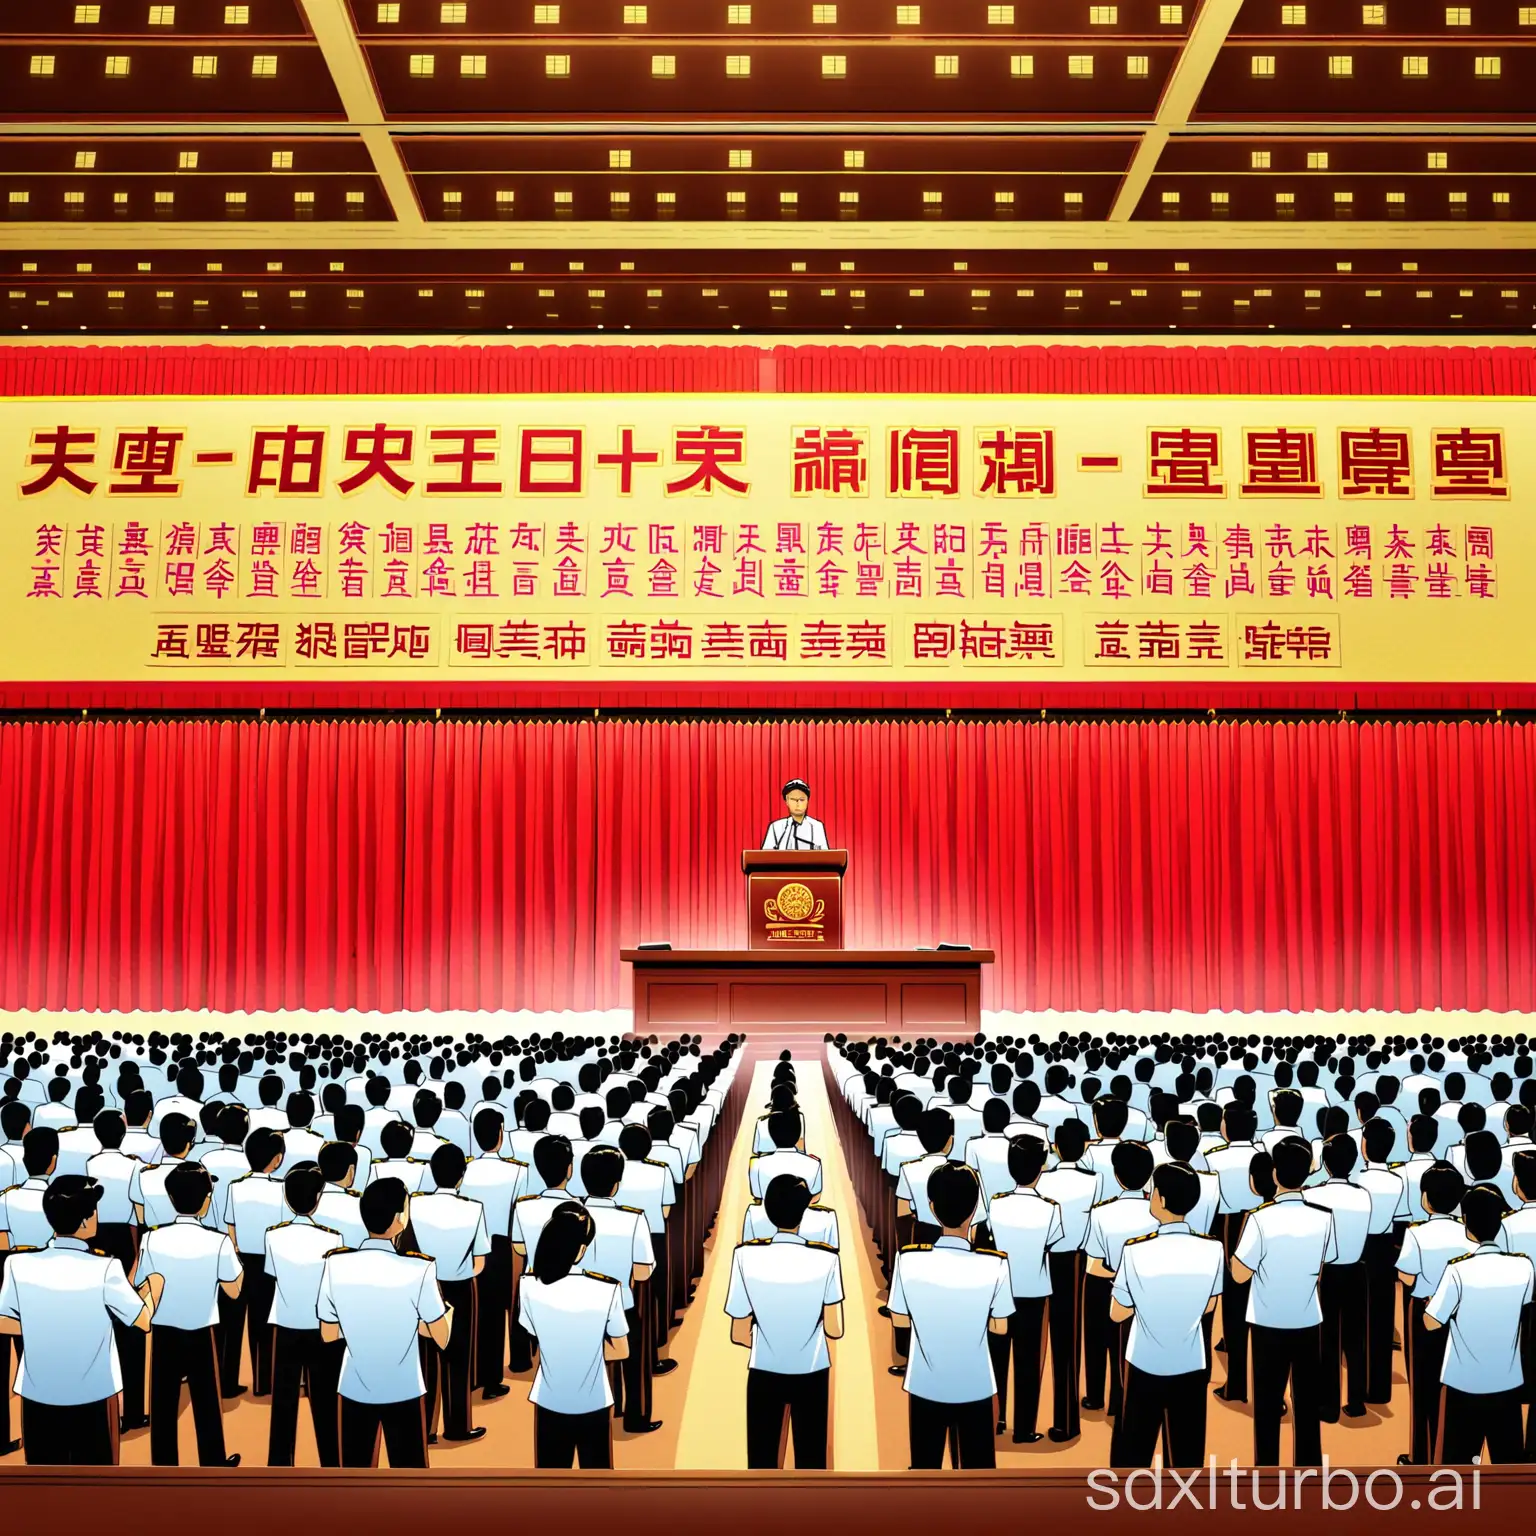 China-Postal-Savings-Bank-Legal-Compliance-Ceremony-with-Employees-Pledging